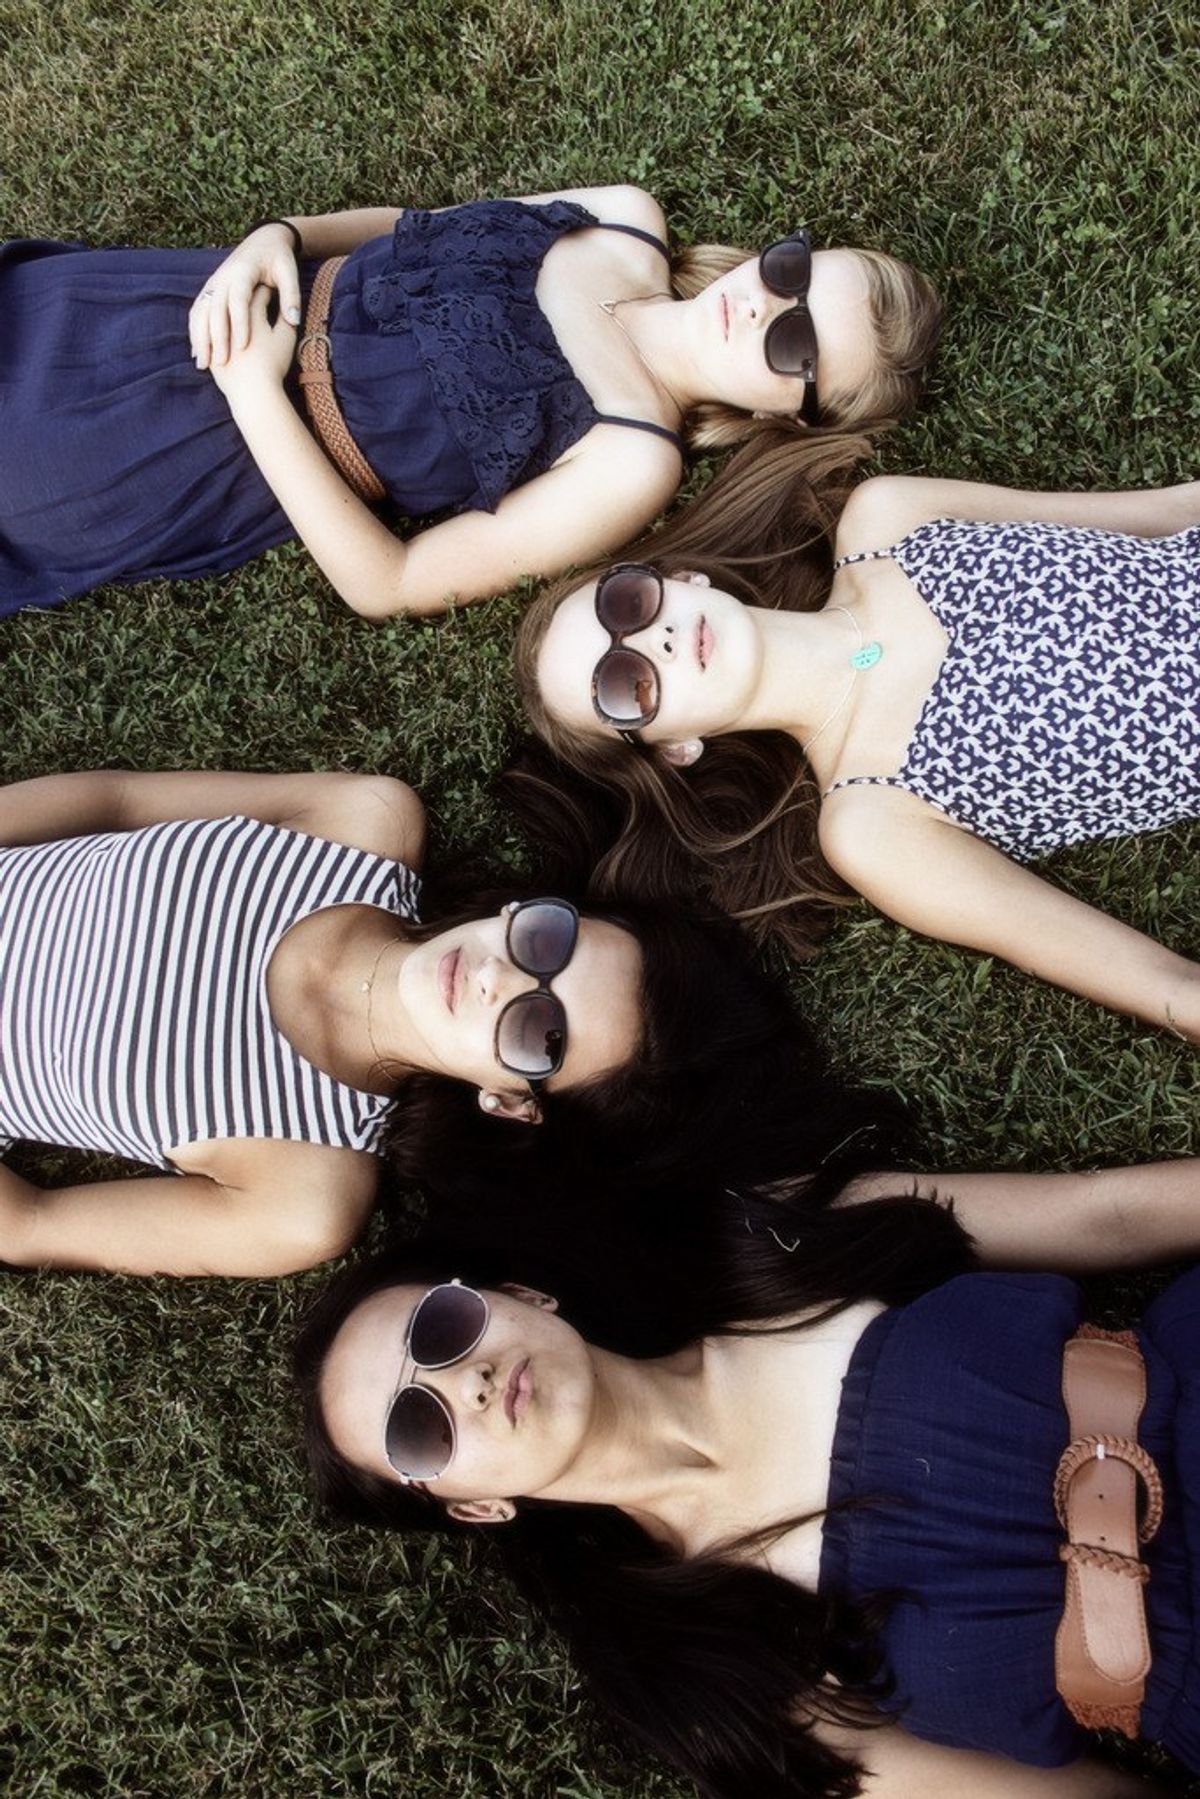 A Letter To My Future Roommates: You Can Always Count On Me